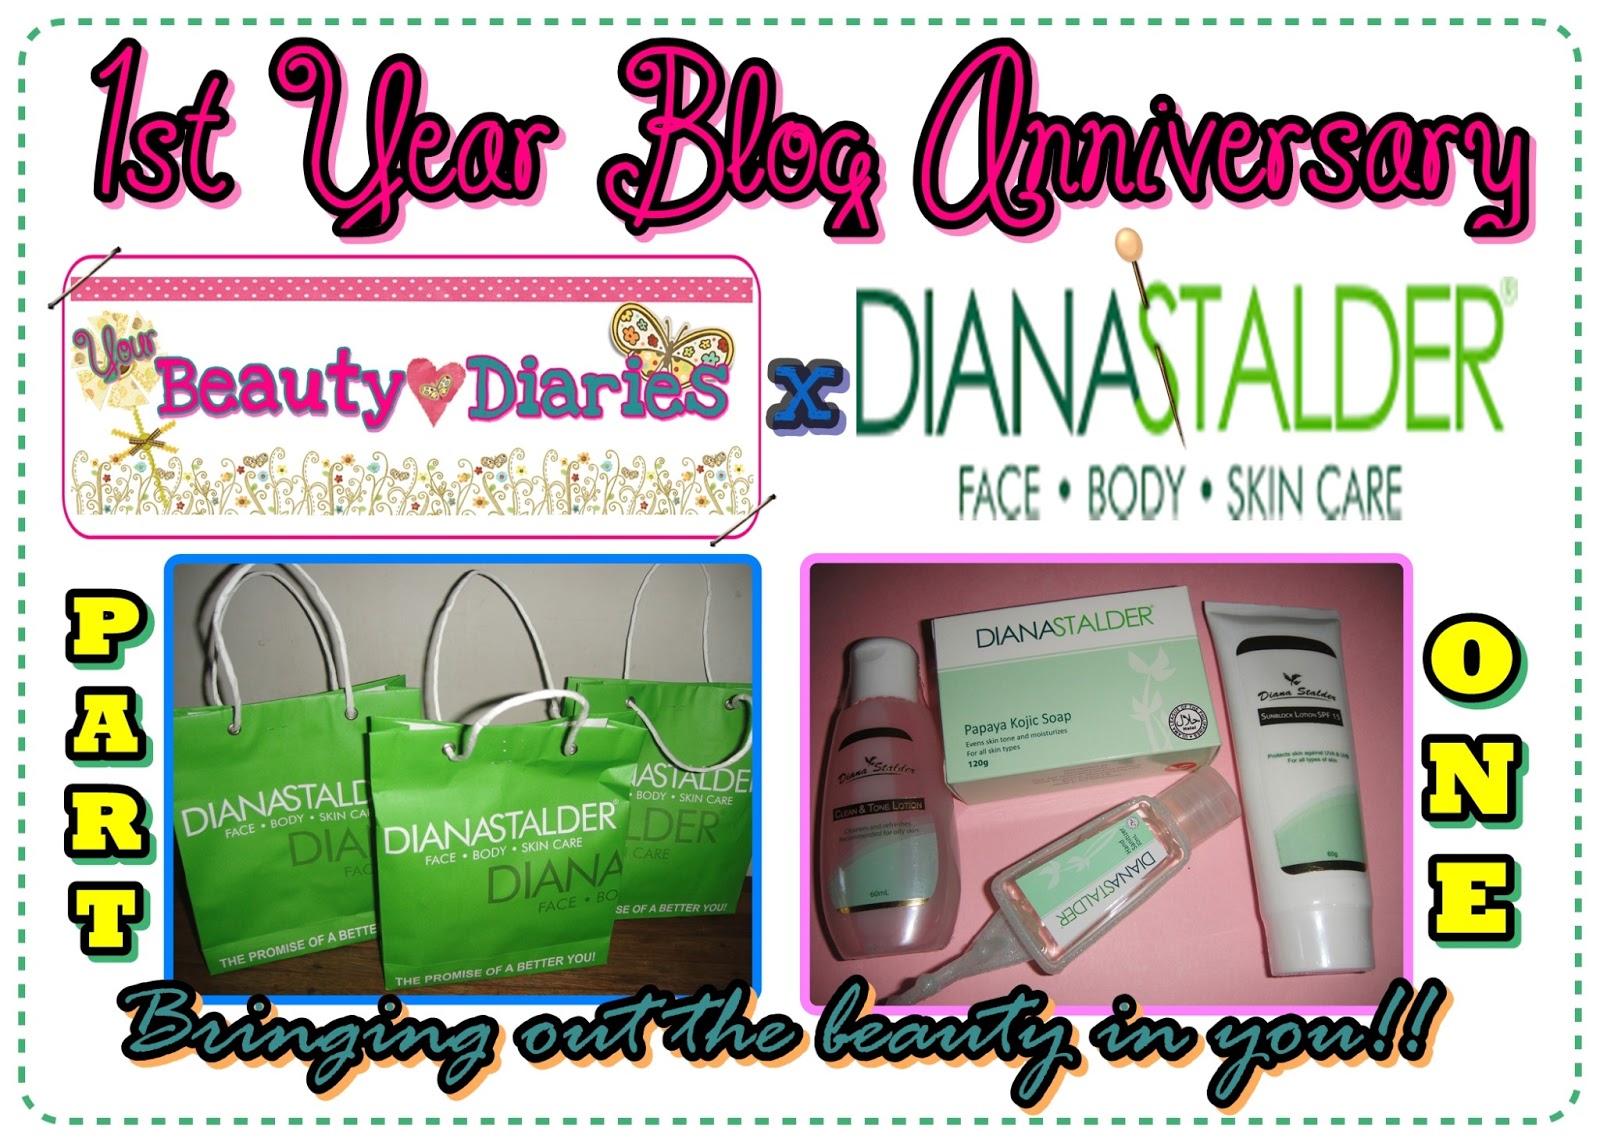 Your Beauty Diaries 1st Year Blog Anniversary Giveaway